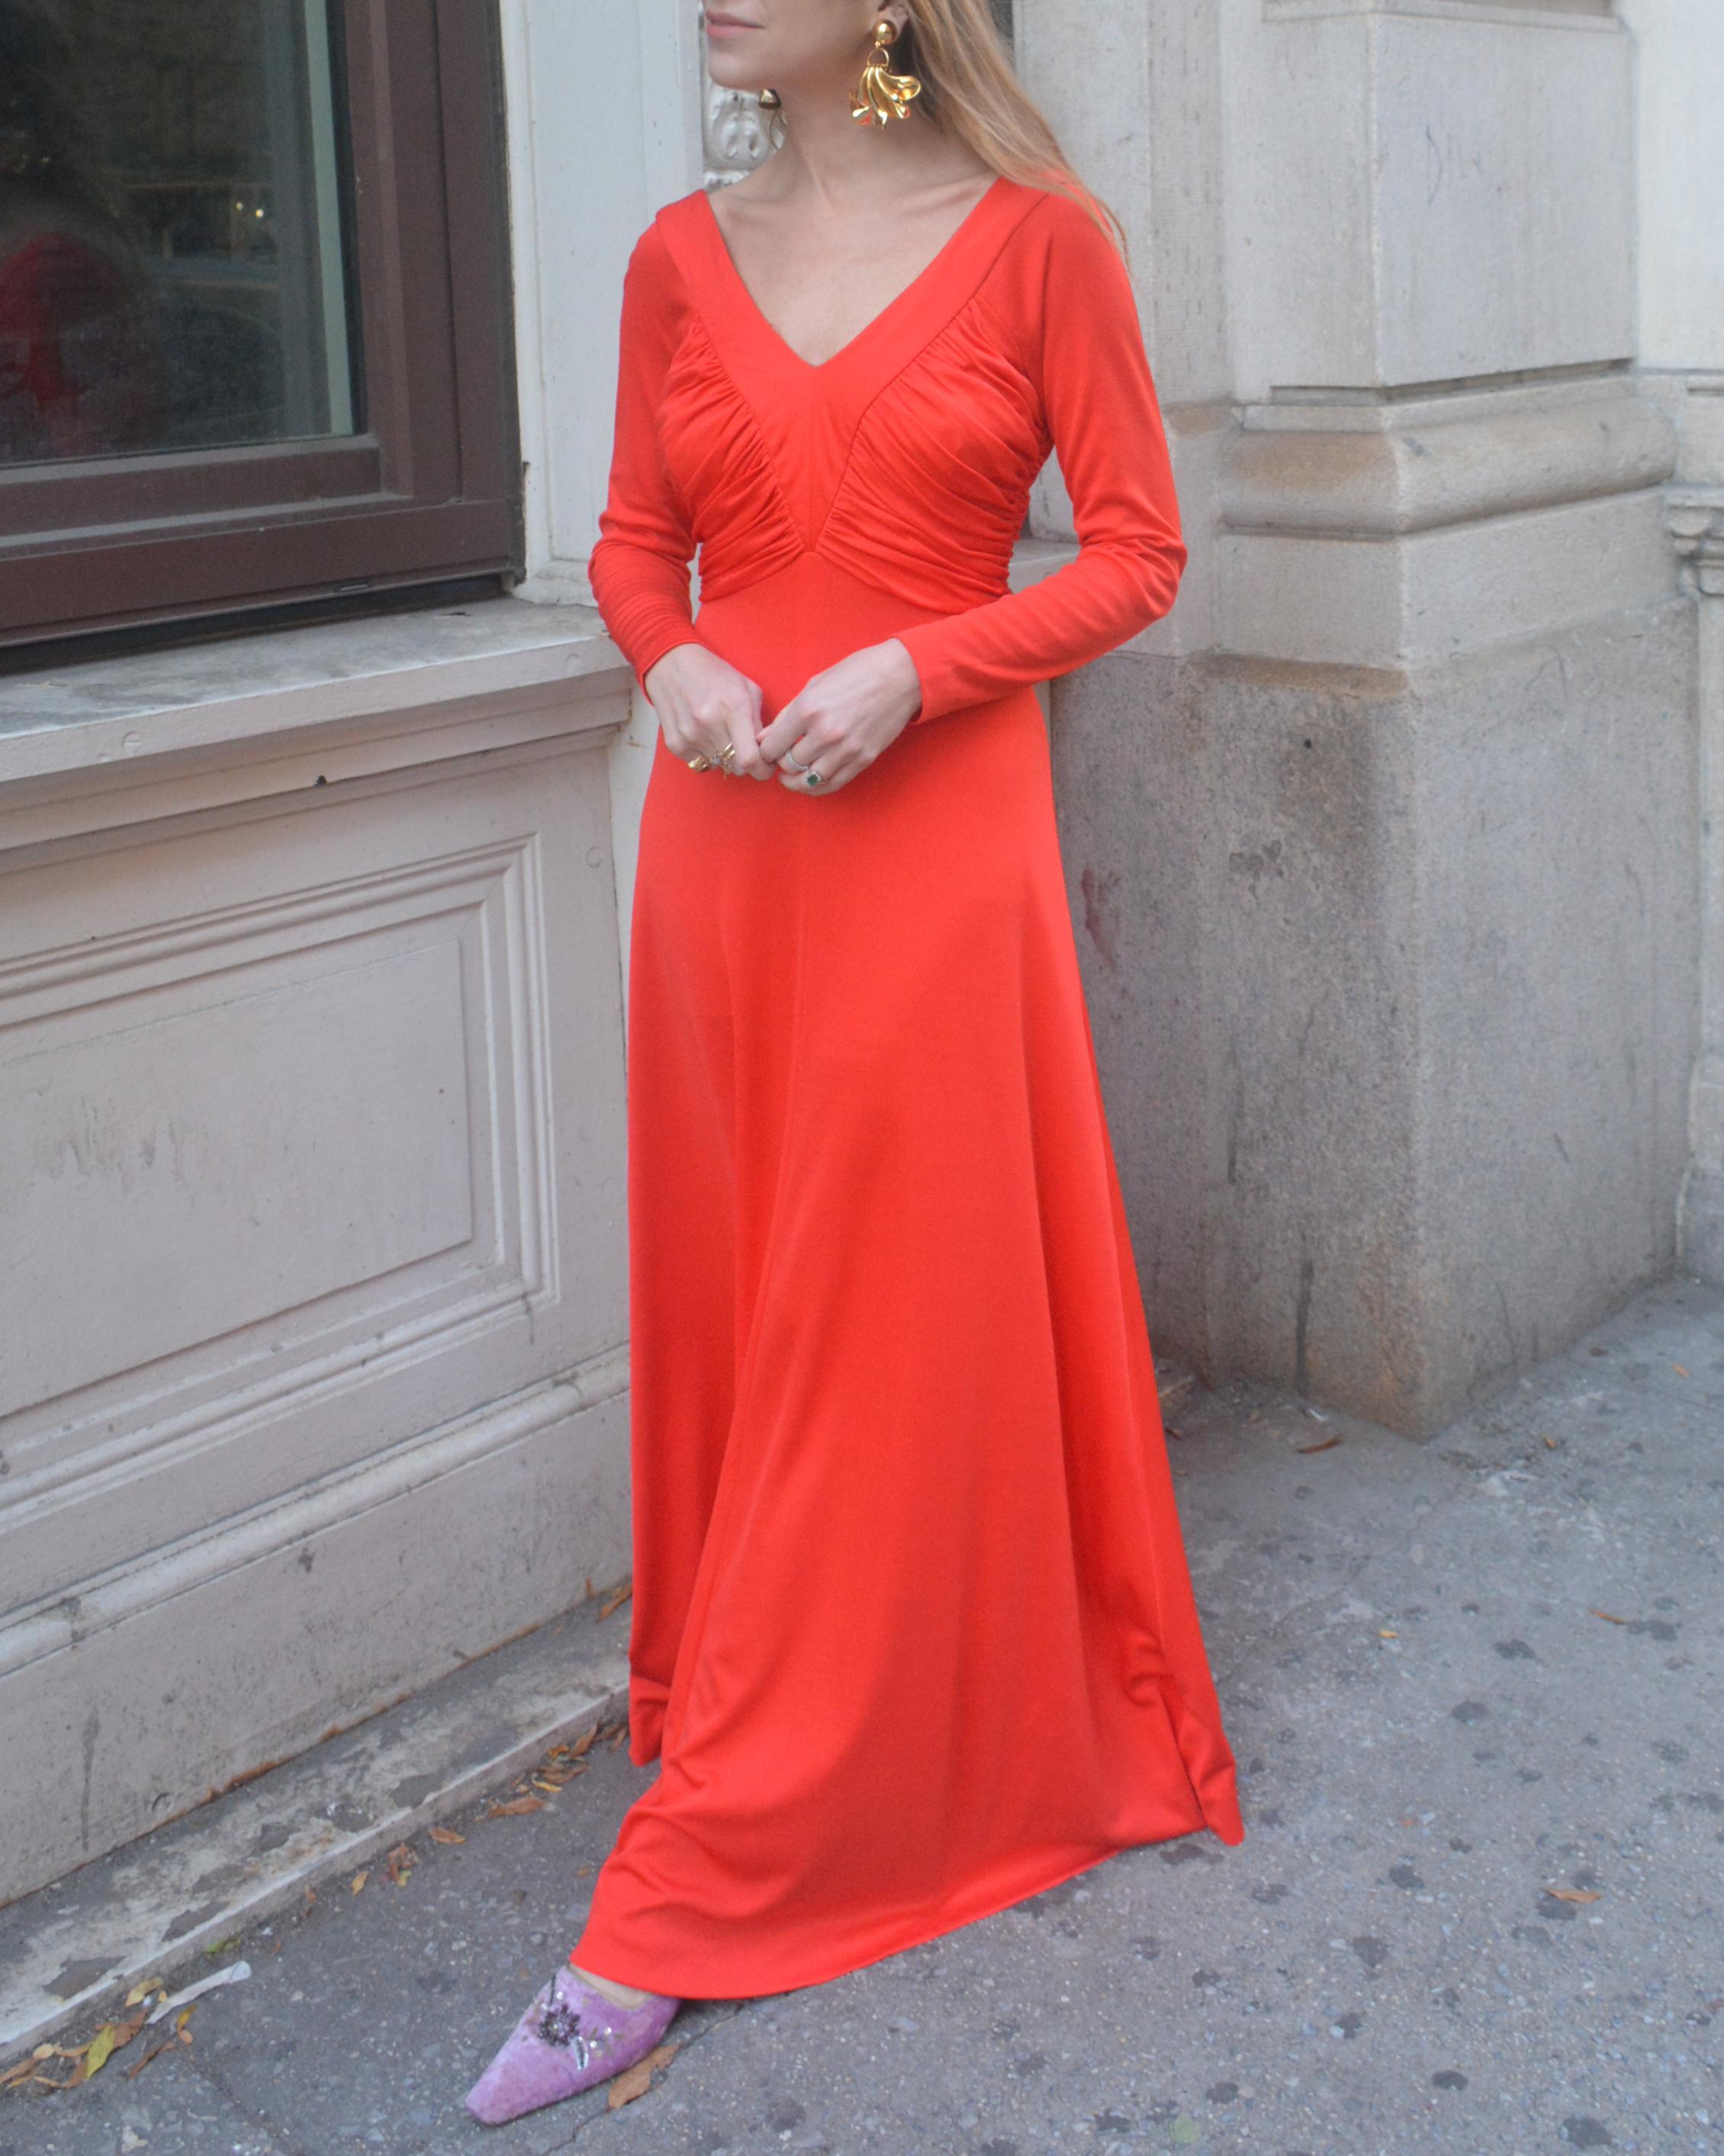 A classic 1970s maxidress, in a fiery orange color: this dress has the silhouette of a gown with the casual elegance of jersey fabric. The color is kind of magical, and difficult to capture in an image: it is not neon but is very saturated and deep.